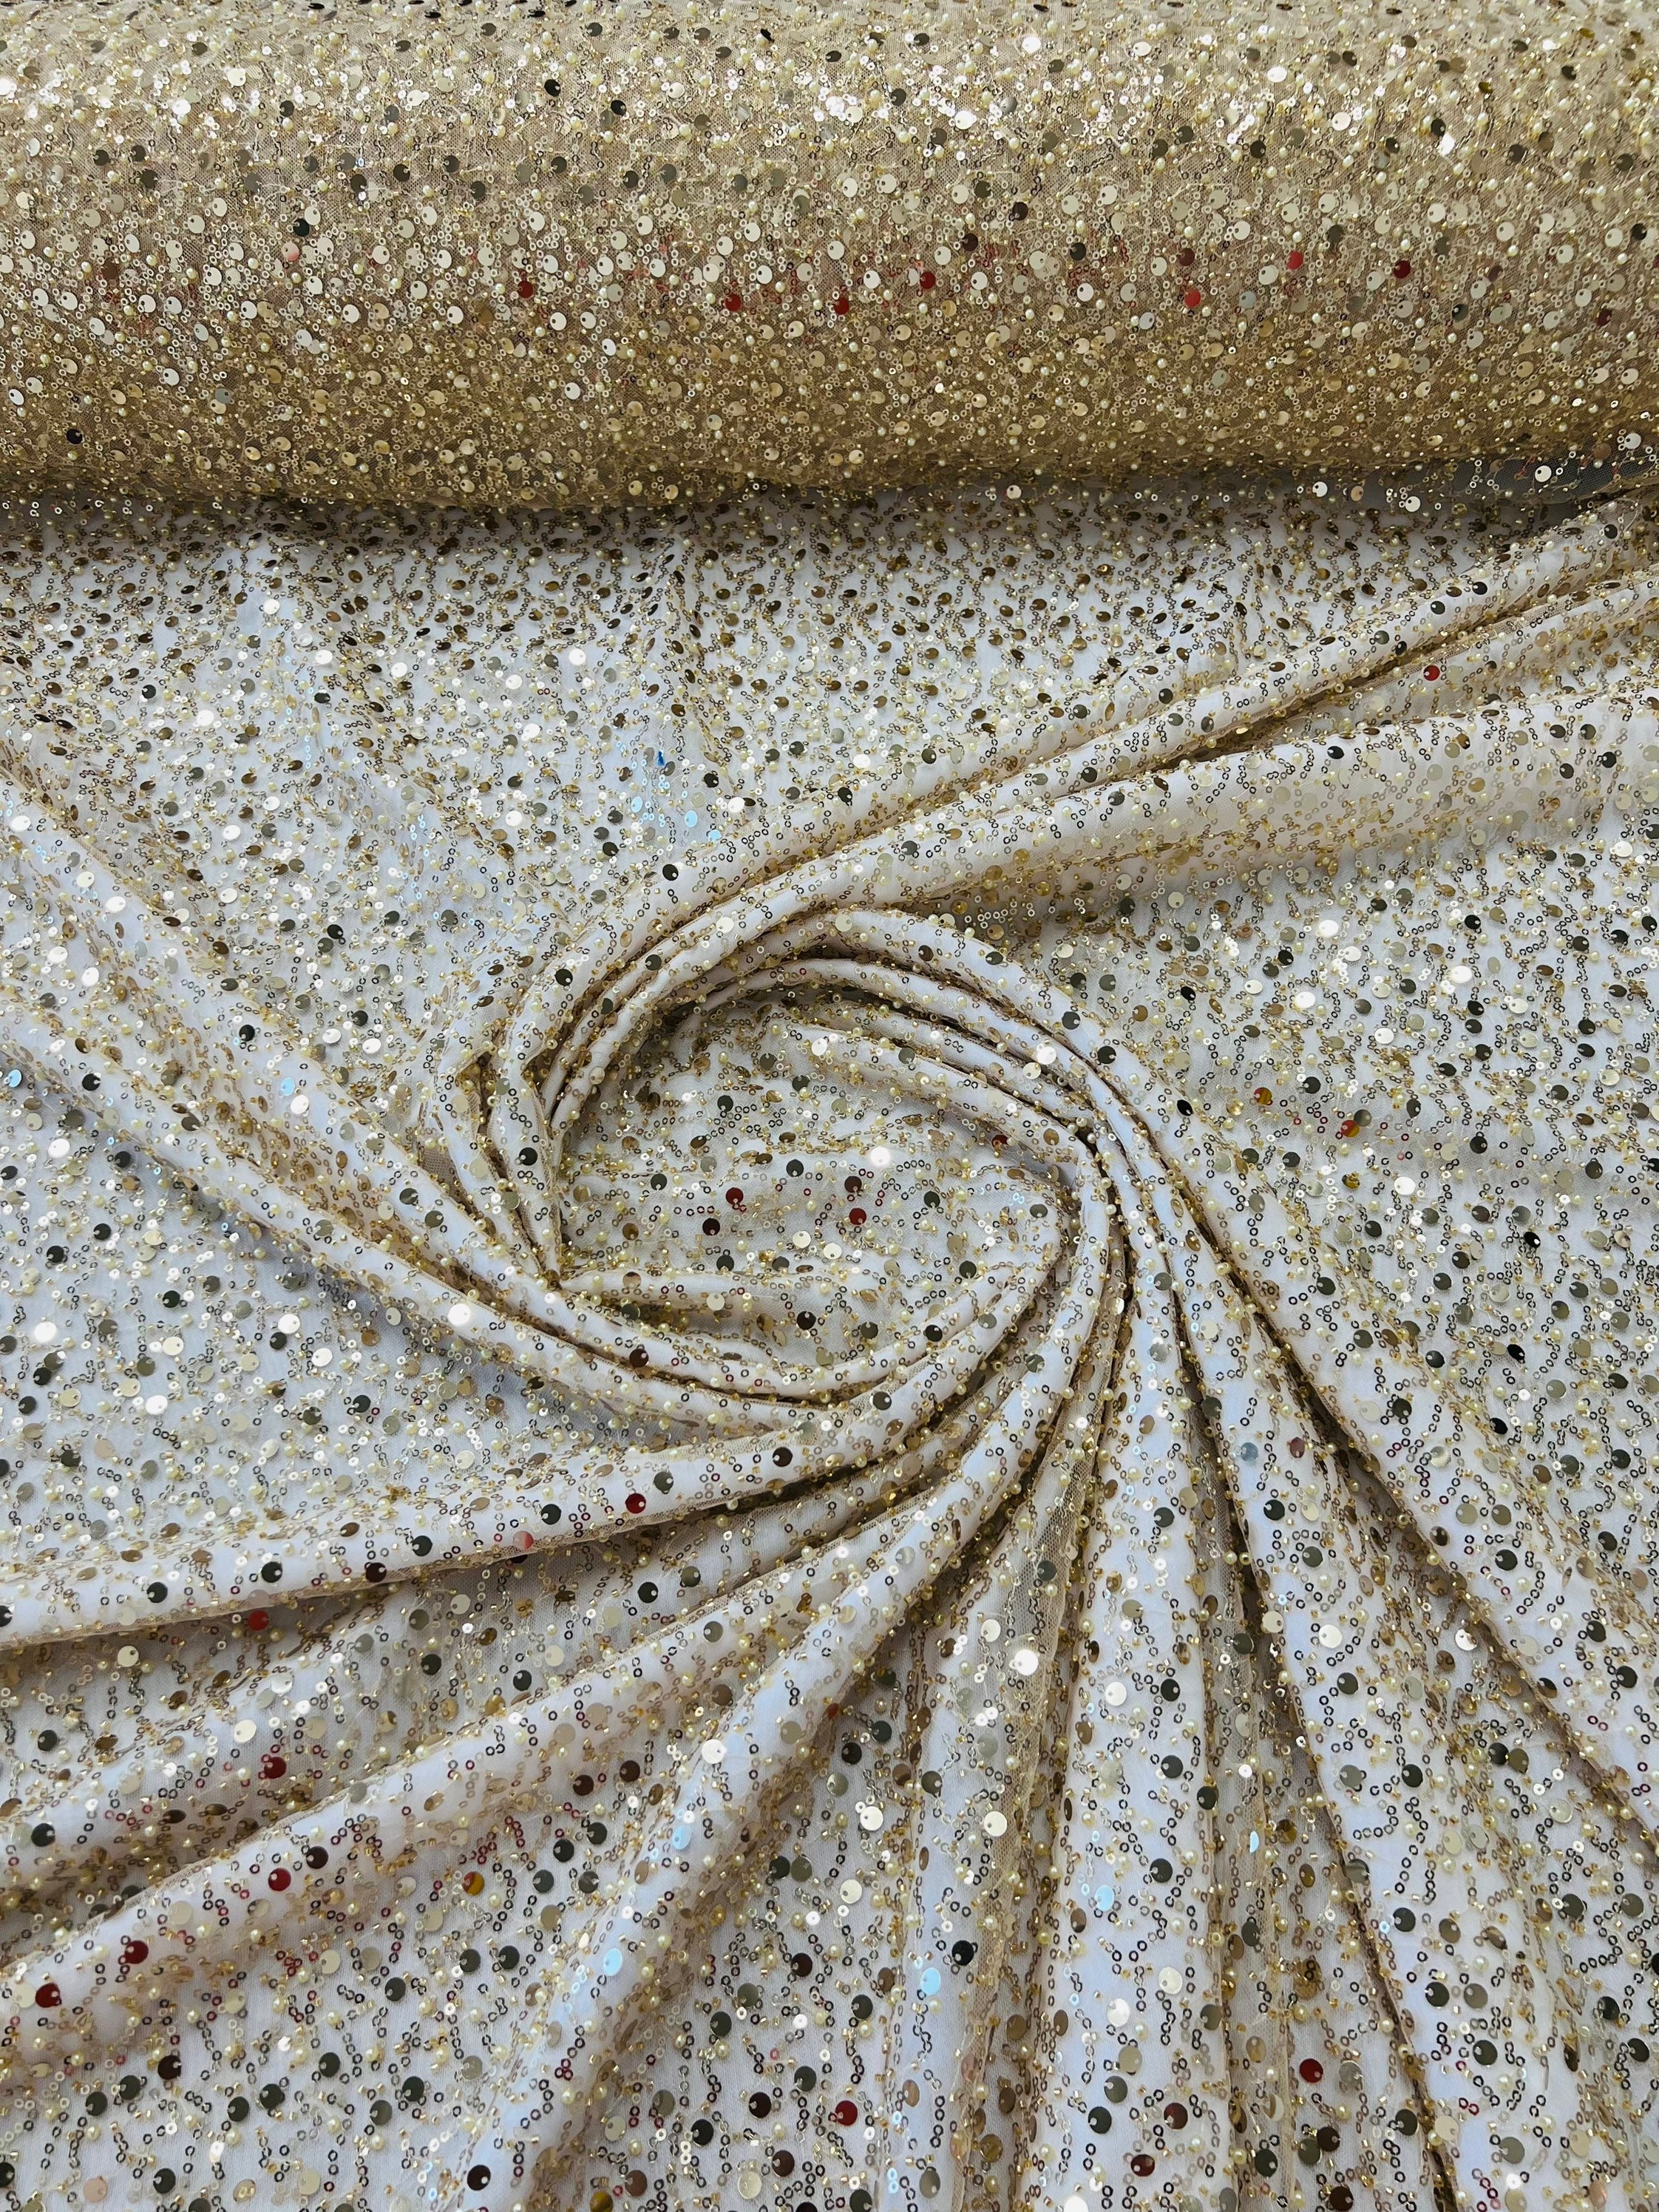 Lt Gold Embroidery Beaded Fabric By The Yard With Sequin Fabric, Sequin on  Mesh Fabric, Handmade Lace, Beads on a Mesh